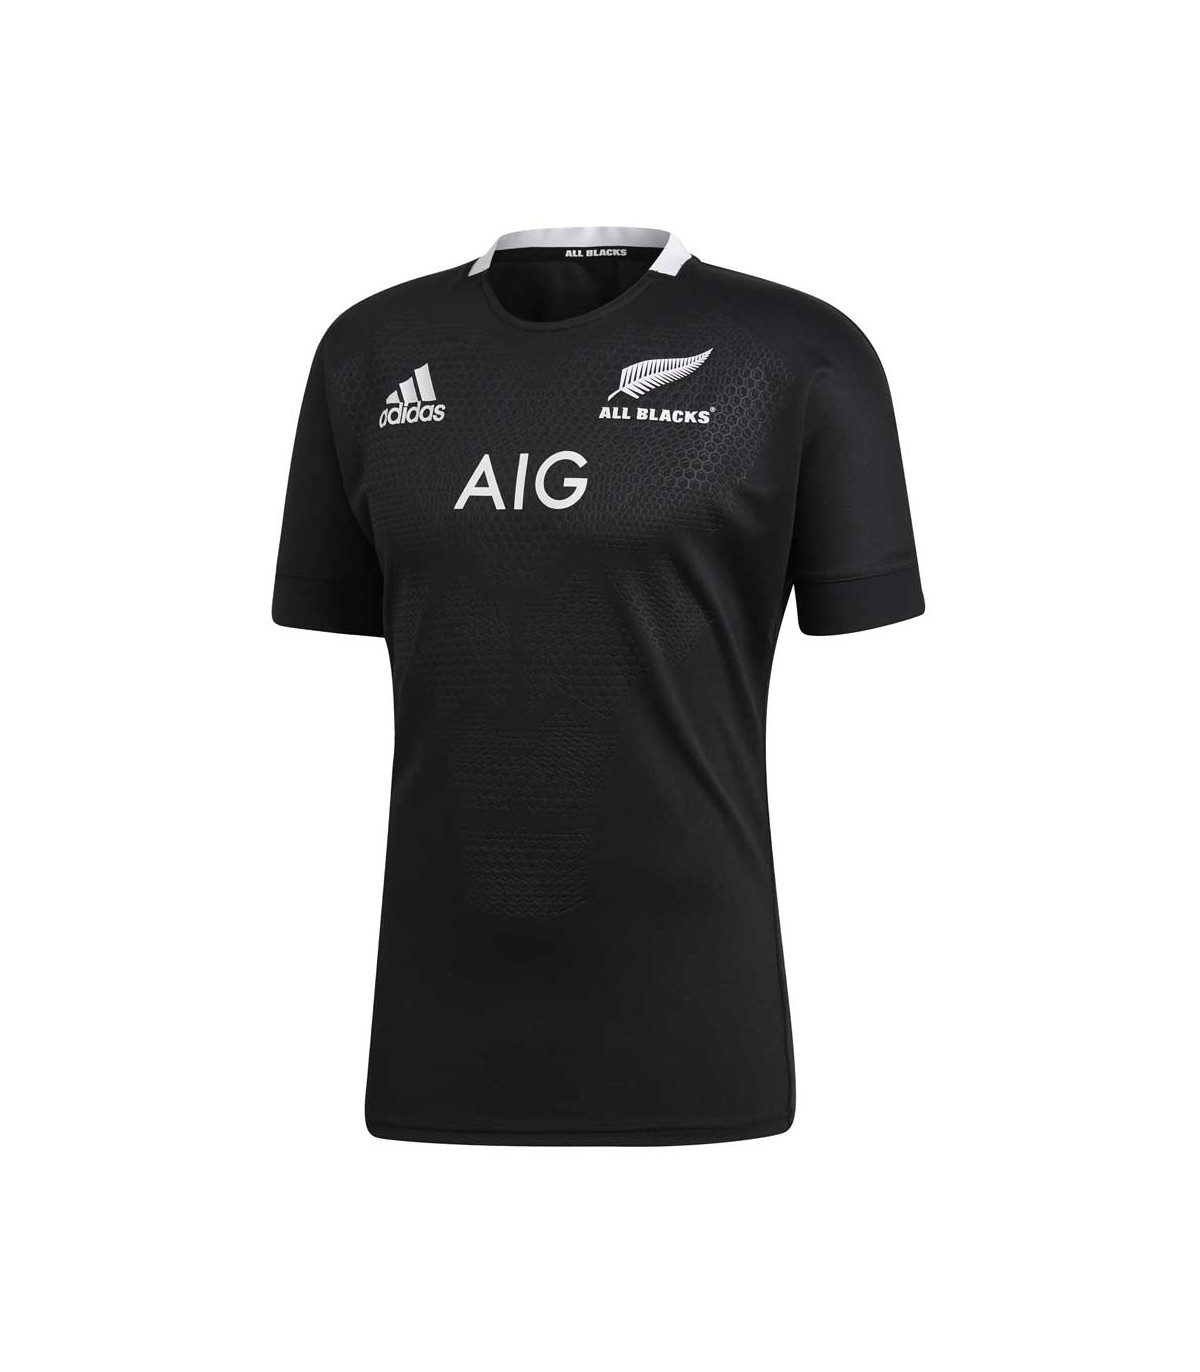 MAILLOT RUGBY ALL BLACKS DOMICILE 2020/2021 - ADIDAS chez Rugby-Cor